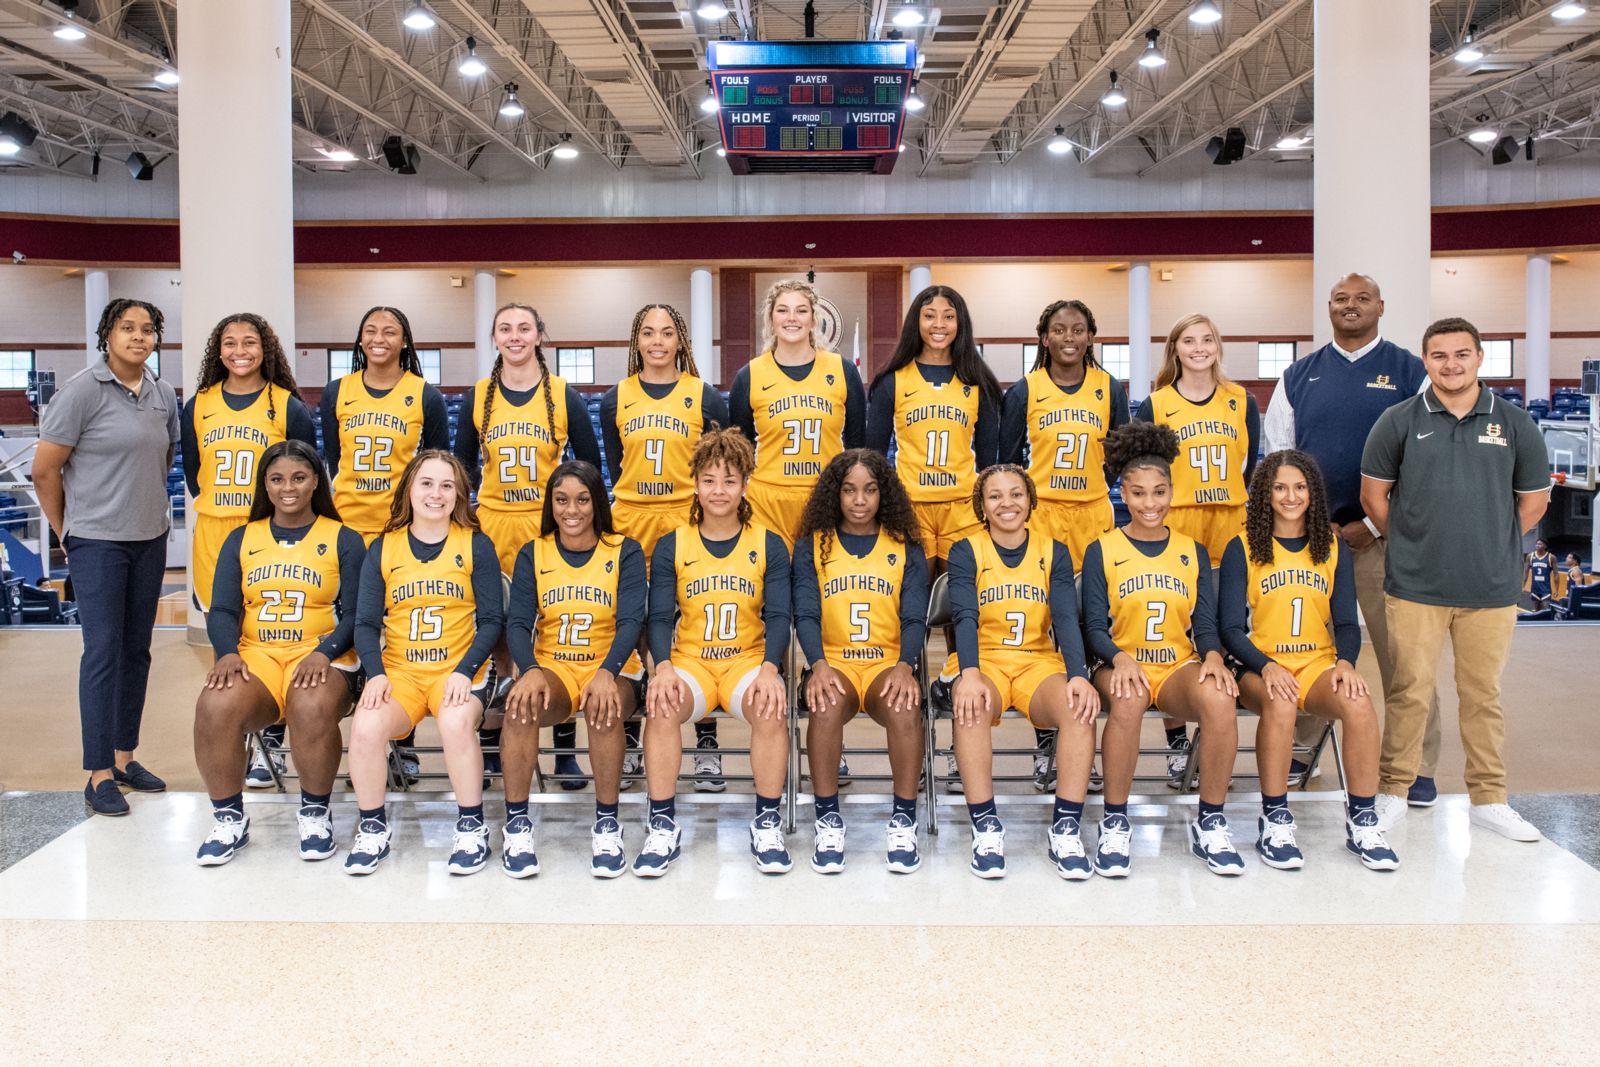 suscc women's basketball team poses for a photo